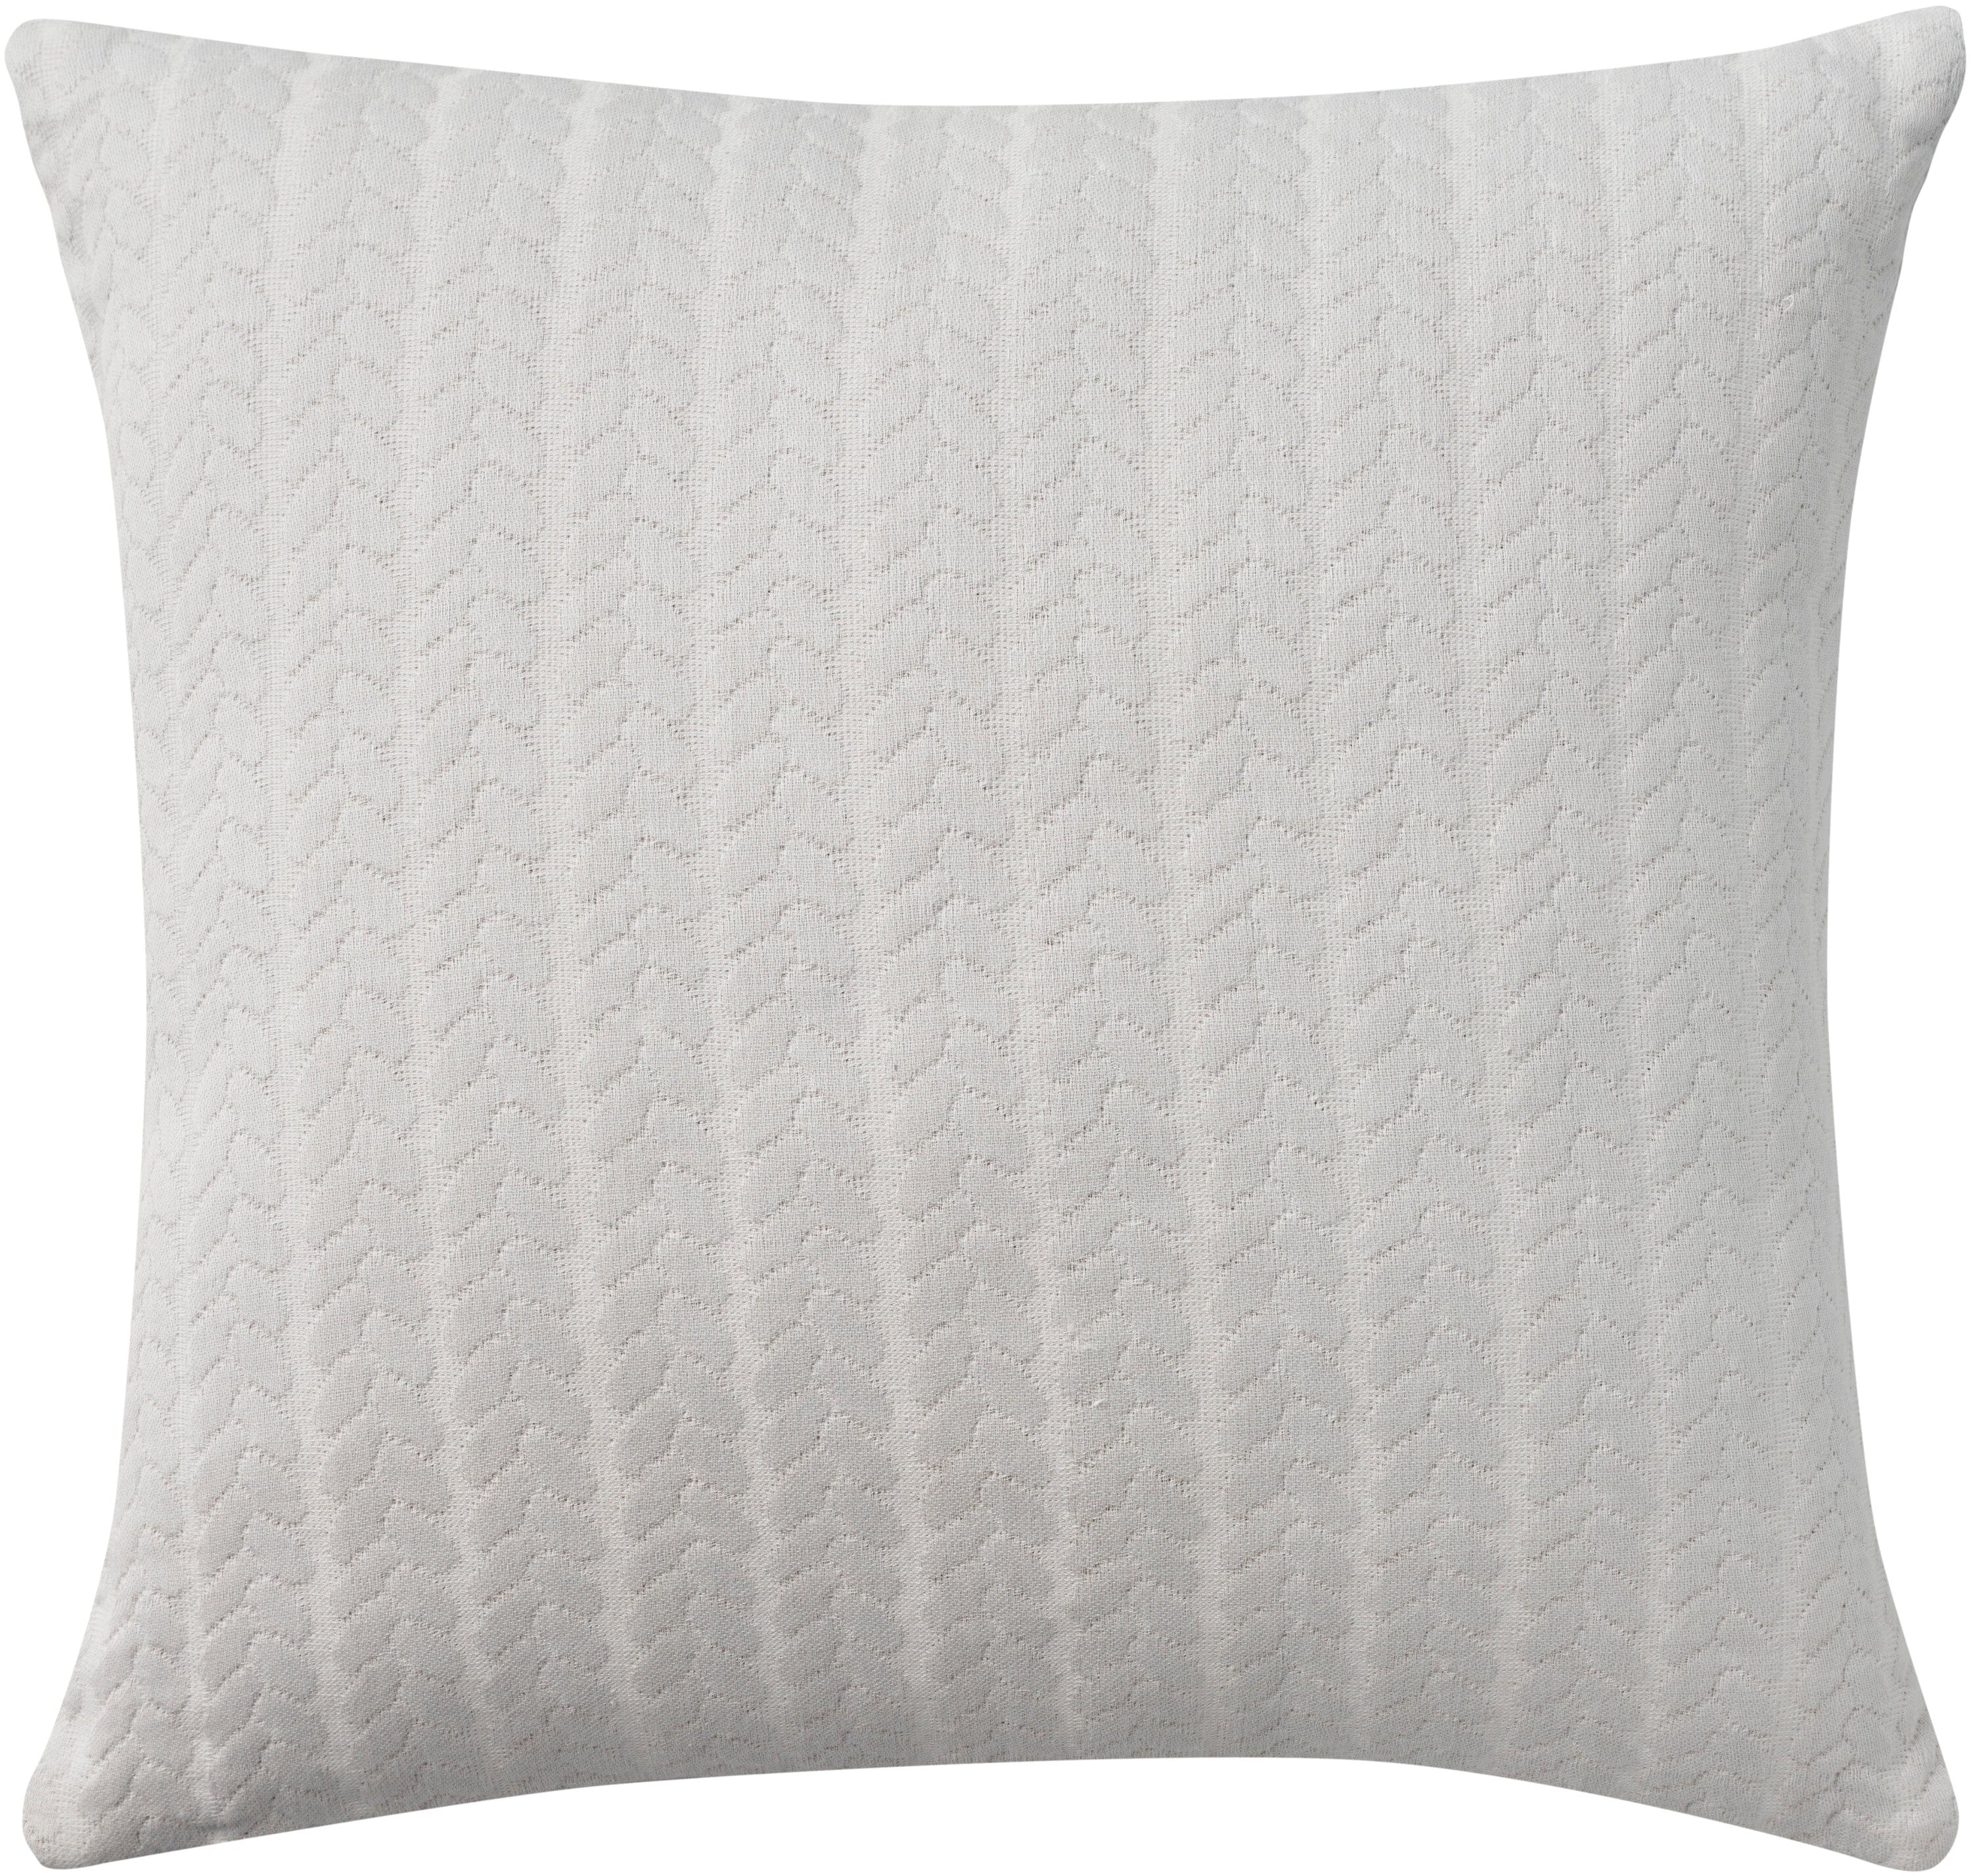 Mina Victory Cover Verticle Stripes 18" x 18" Lt Grey Indoor Pillow Covers Mina Victory